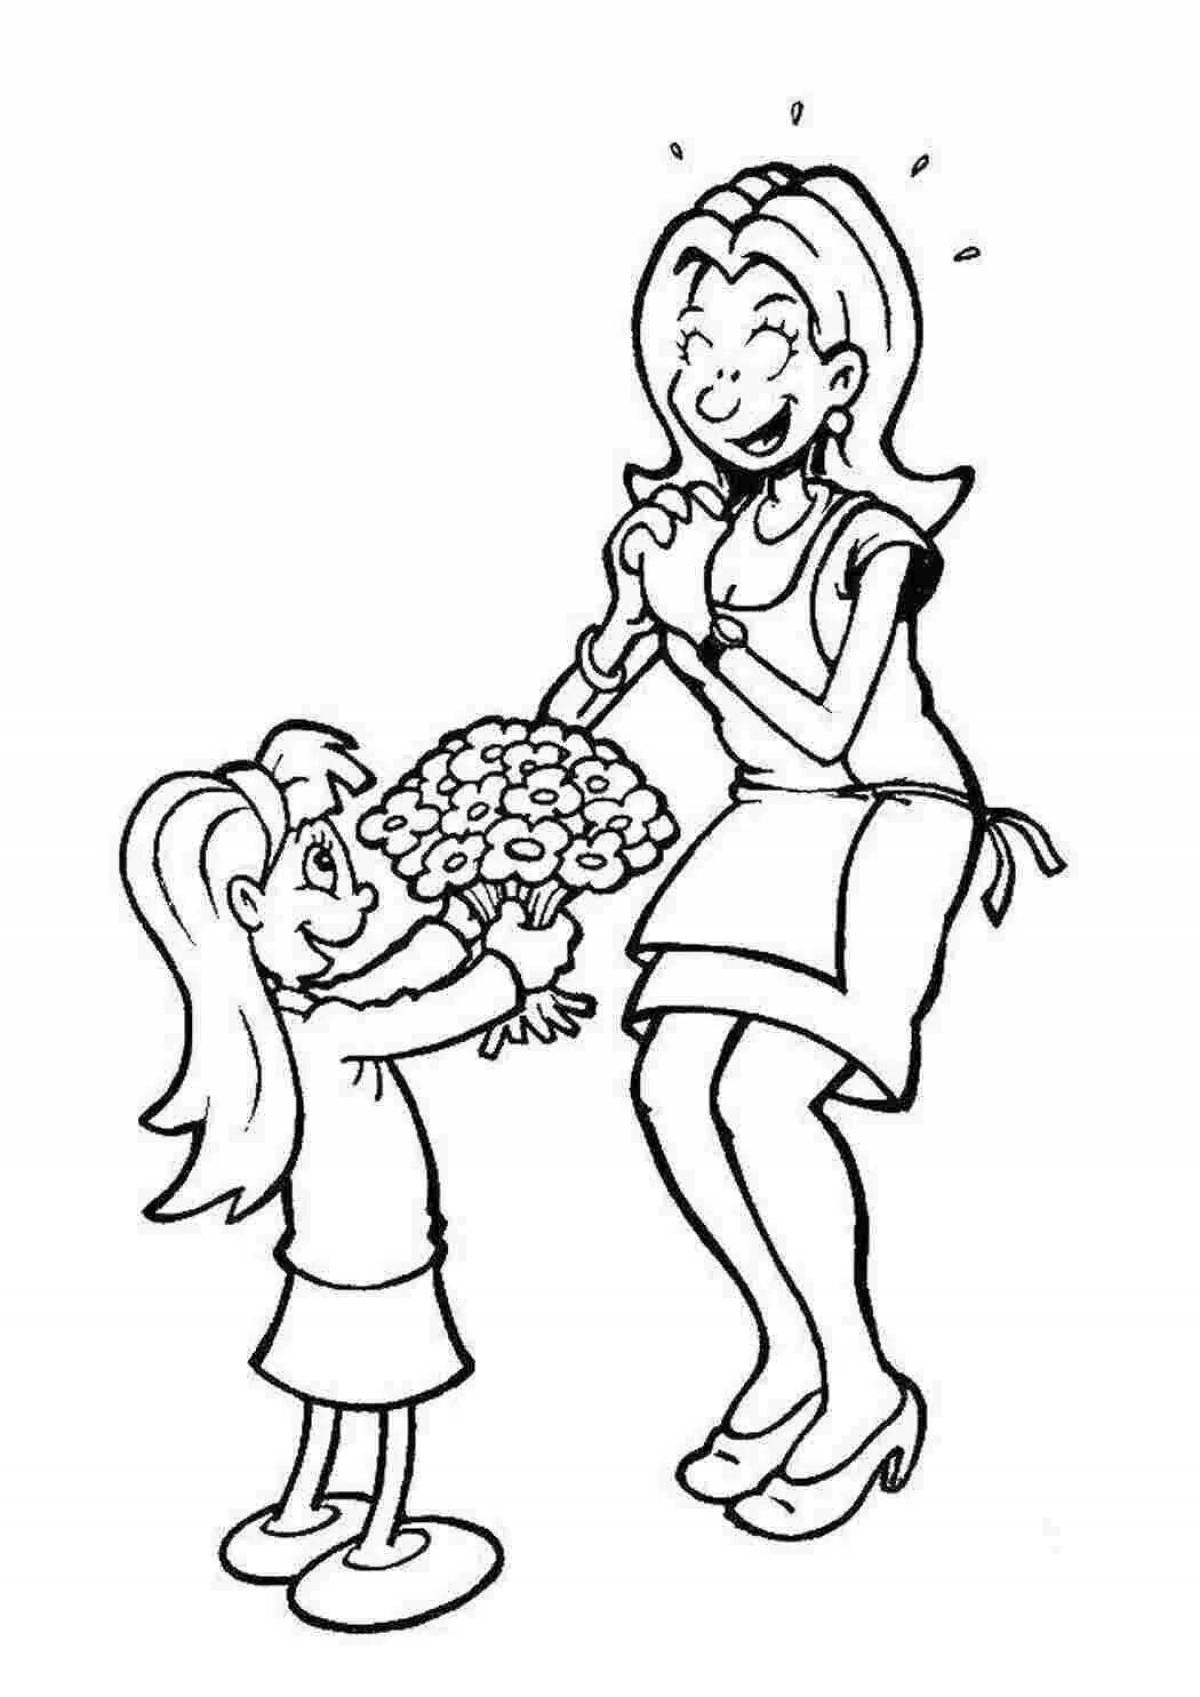 Coloring page shining mother and daughter